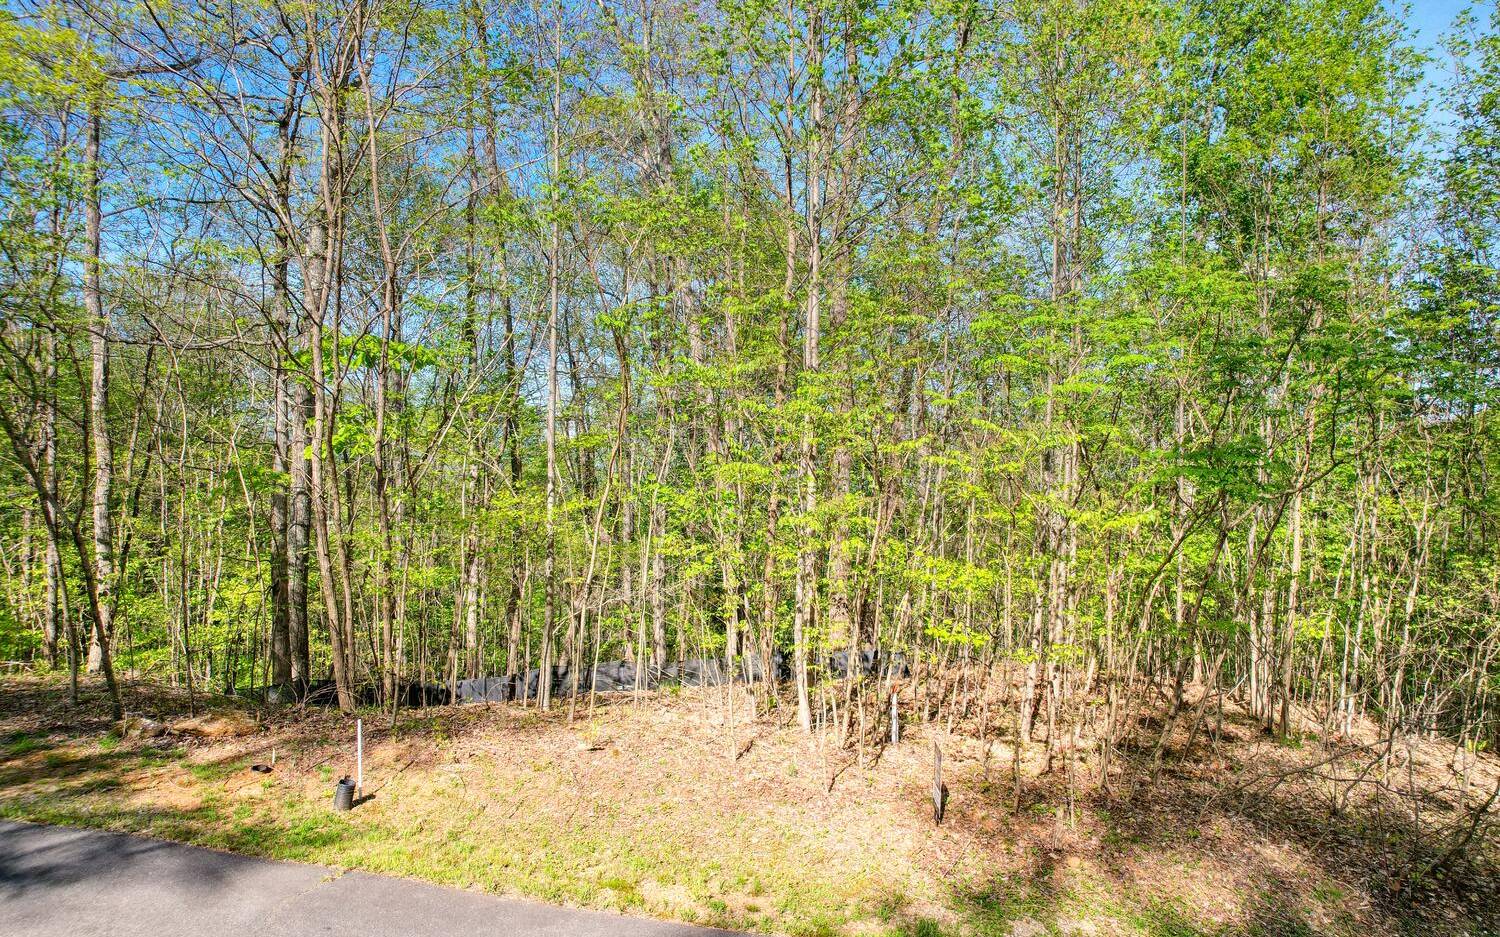 Nice, wooded lot in secluded community outside Young Harris. A little trimming should yield some long range mountain views, paved streets and underground utilities. Close to Lake Chatuge, trout fishing and all the North Ga Mountains has to offer.